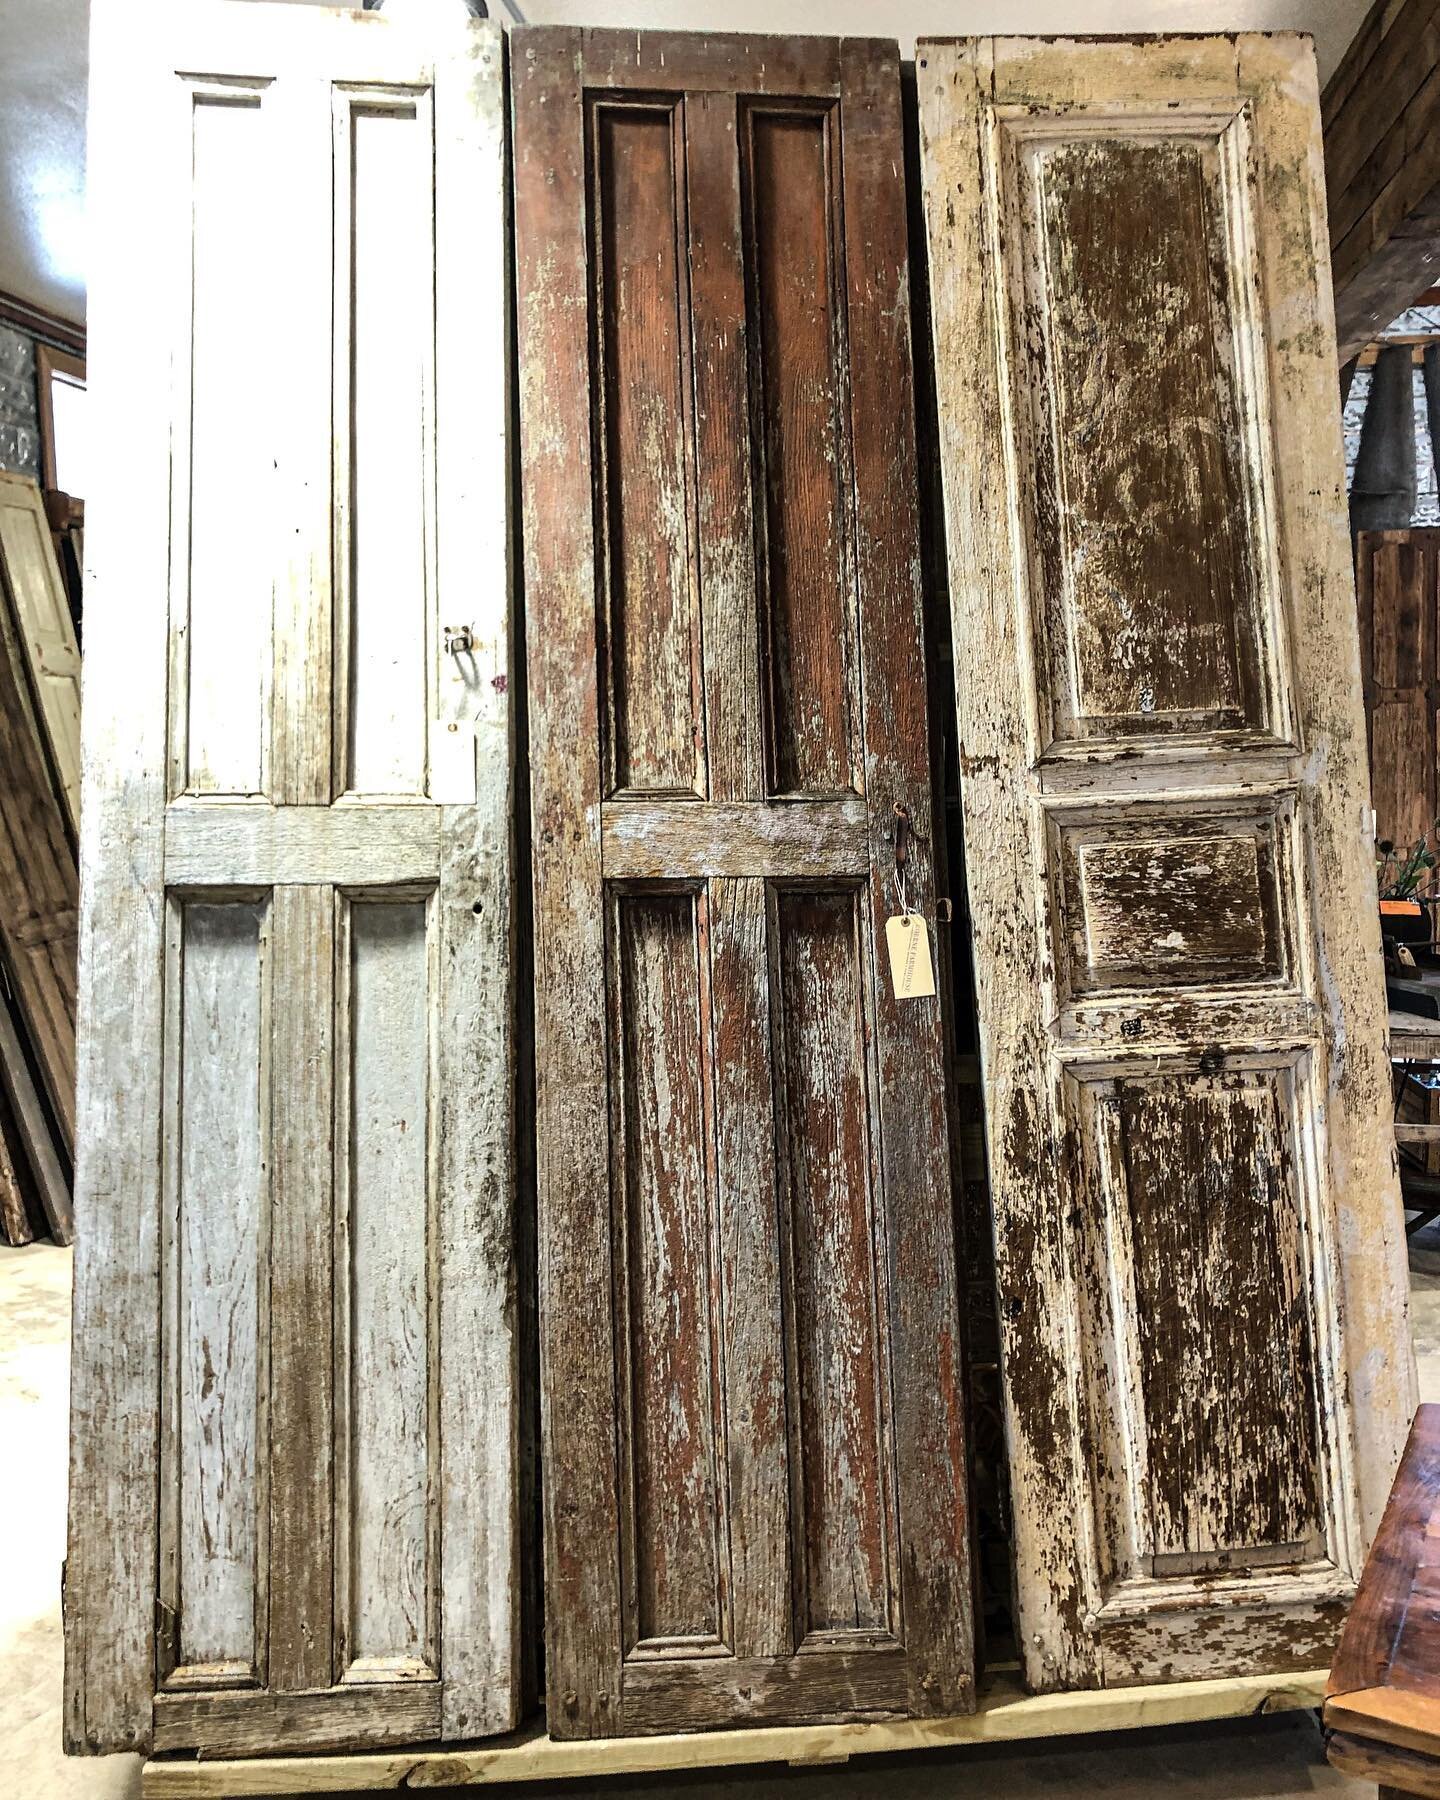 Just in!  These are 3 pair of doors &mdash; the pairs are very similar in size.  The pair in the middle measure approximately 98.5&rdquo; x 23.5&rdquo; each.  Sold individually. 

We&rsquo;re open Mon-Fri 10-5, Sat 10-6, Sun 12-3. We are located at 1